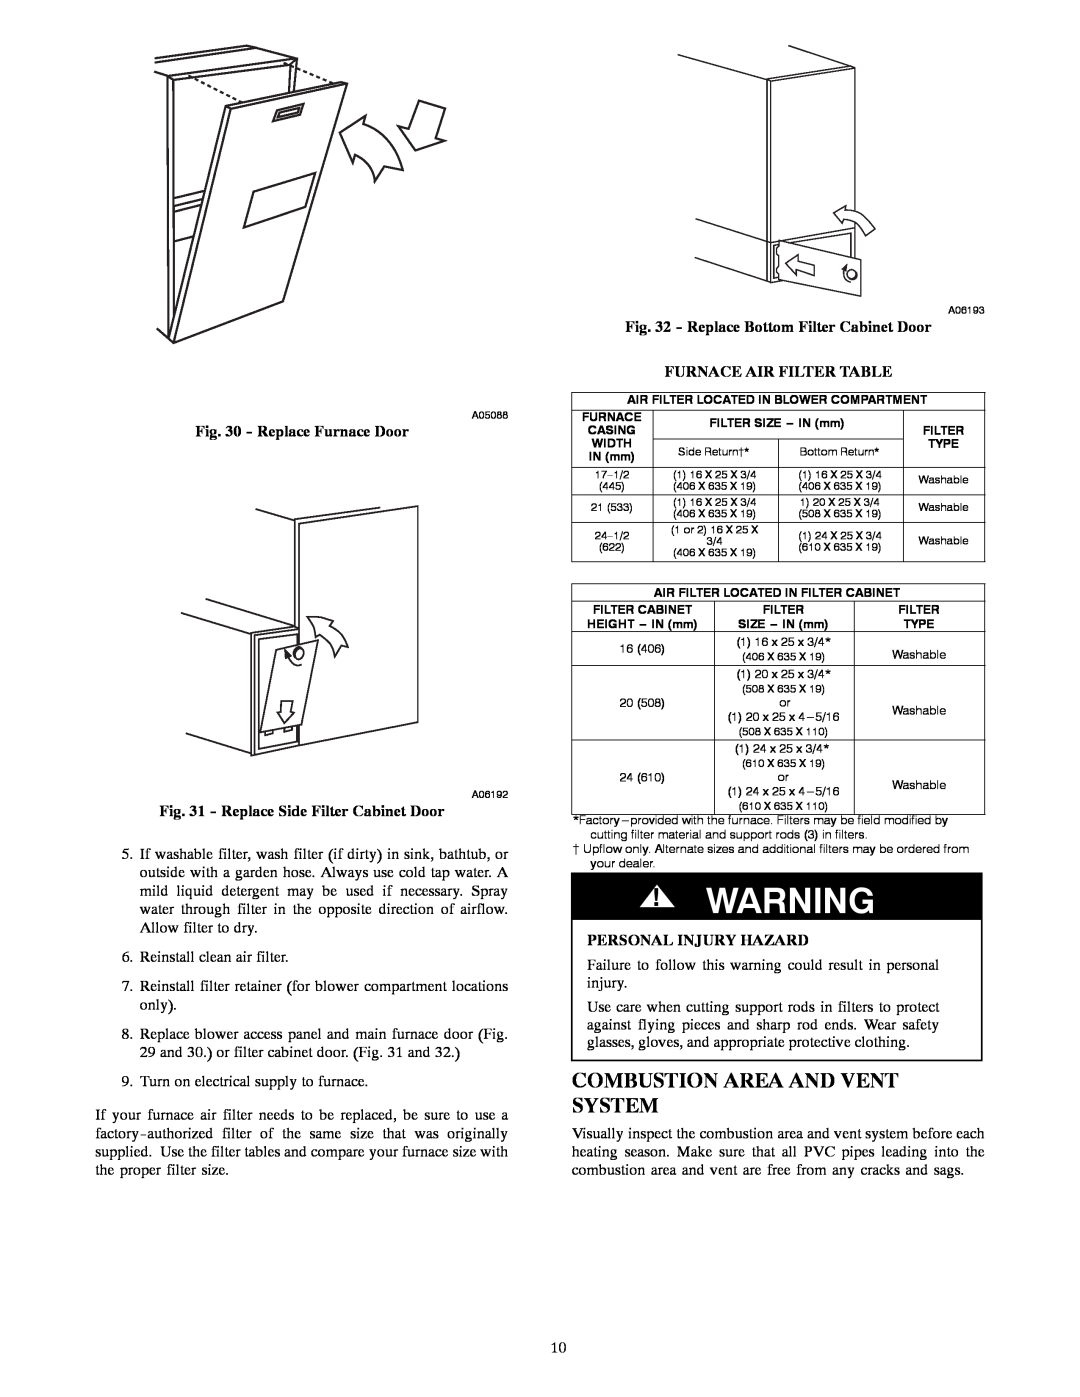 Bryant 355CAV owner manual Combustion Area And Vent System, Replace Furnace Door, Replace Side Filter Cabinet Door 